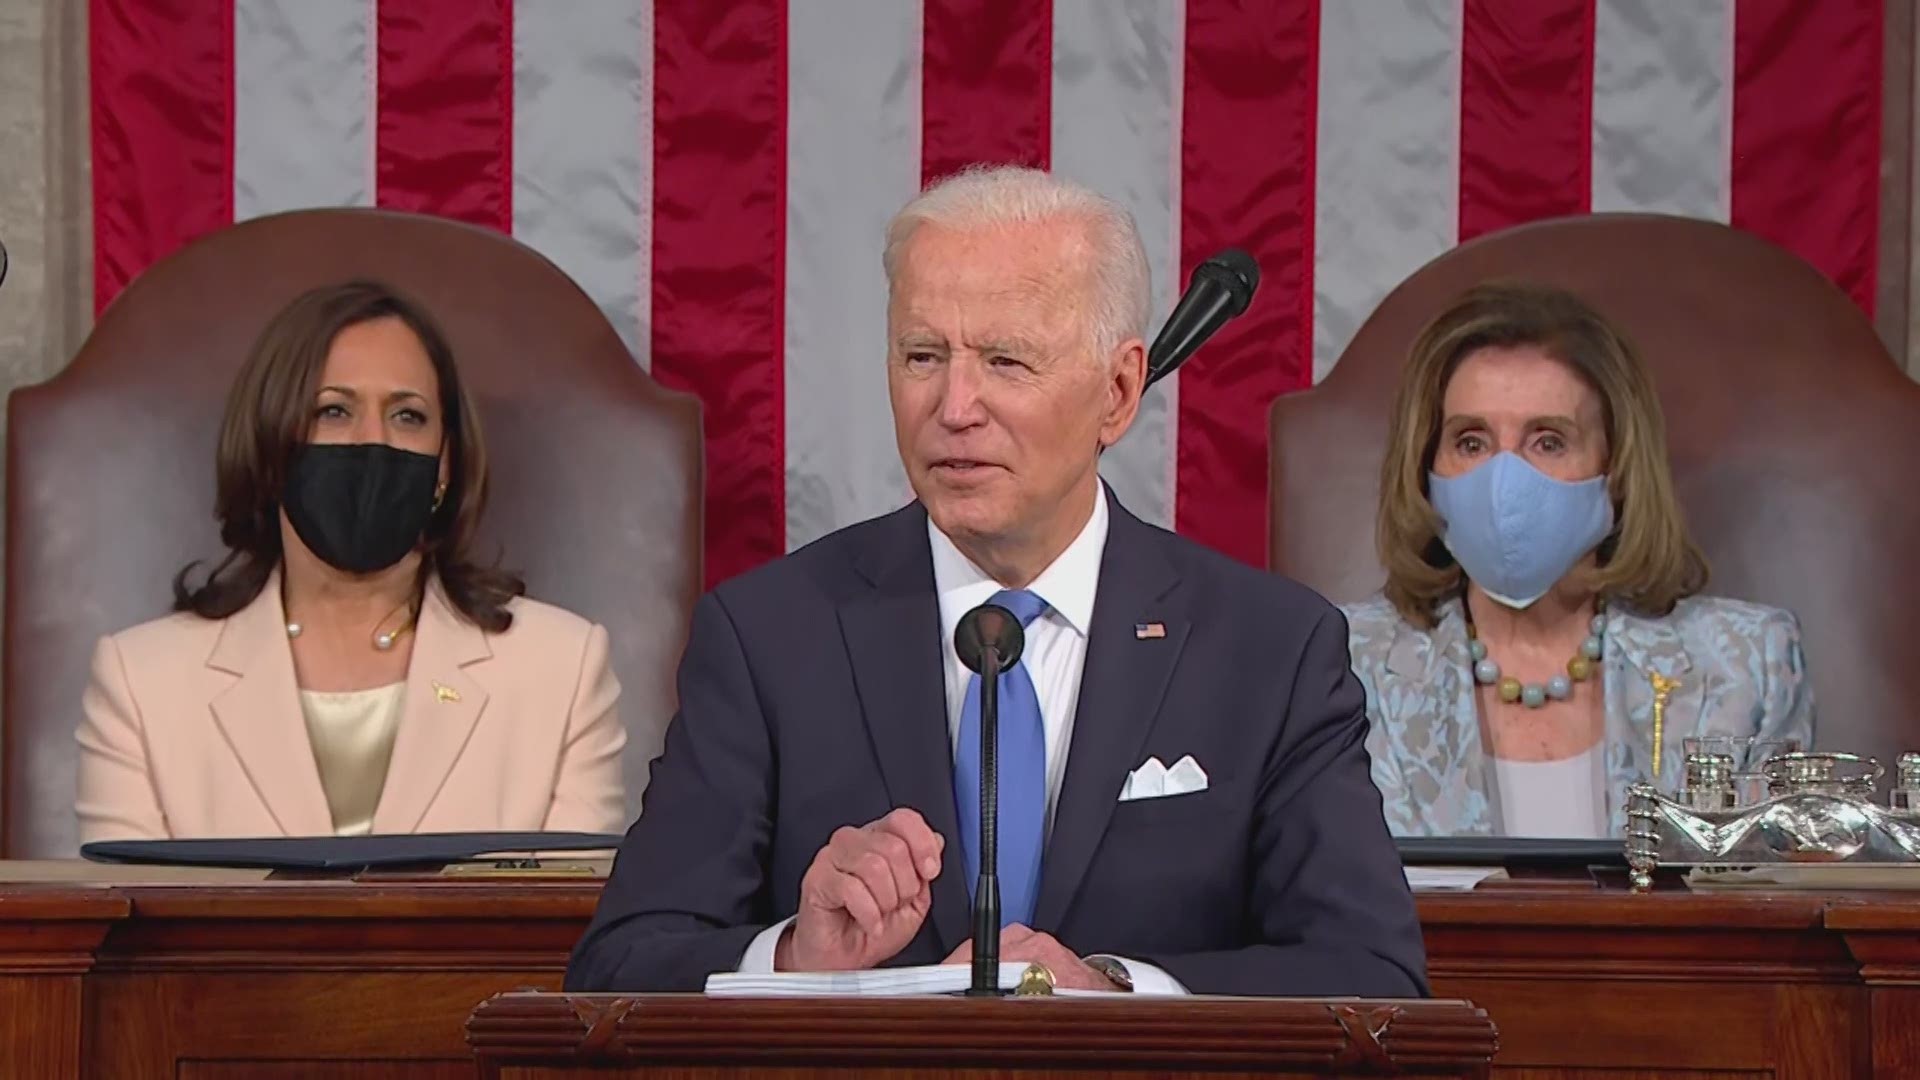 Our VERIFY team is fact-checking what is true and false during President Biden's address to Congress and the Republican response.